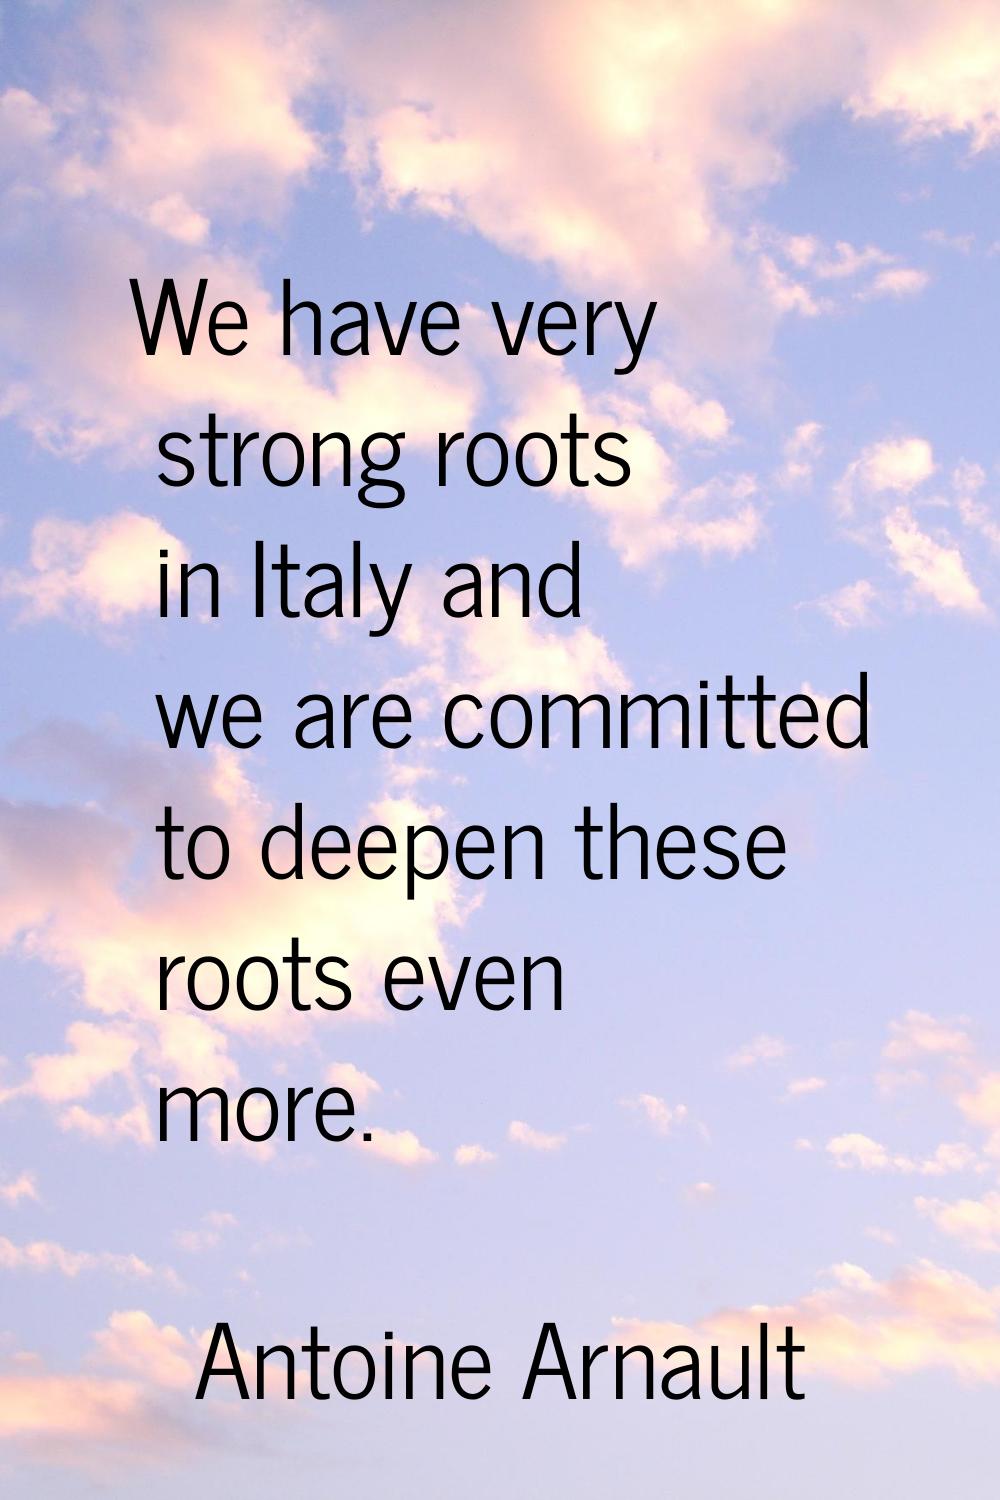 We have very strong roots in Italy and we are committed to deepen these roots even more.